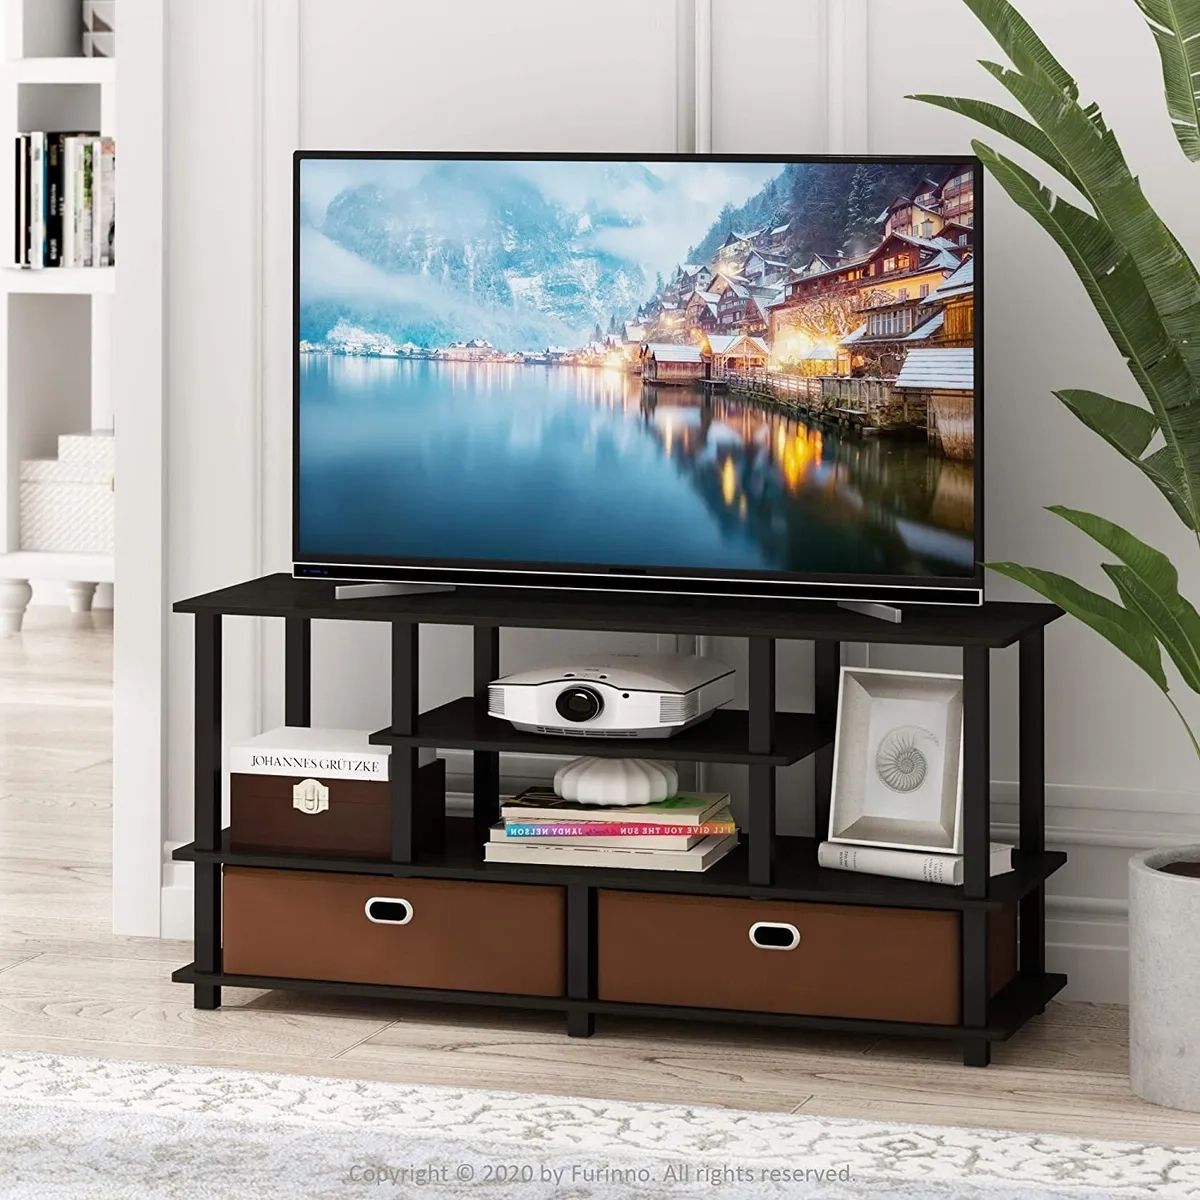 Wide Tv Stand Entertainment Center Narrow With Storage For 50 Inch Tvs  Bedroom | Ebay Inside Wide Entertainment Centers (Photo 1 of 15)